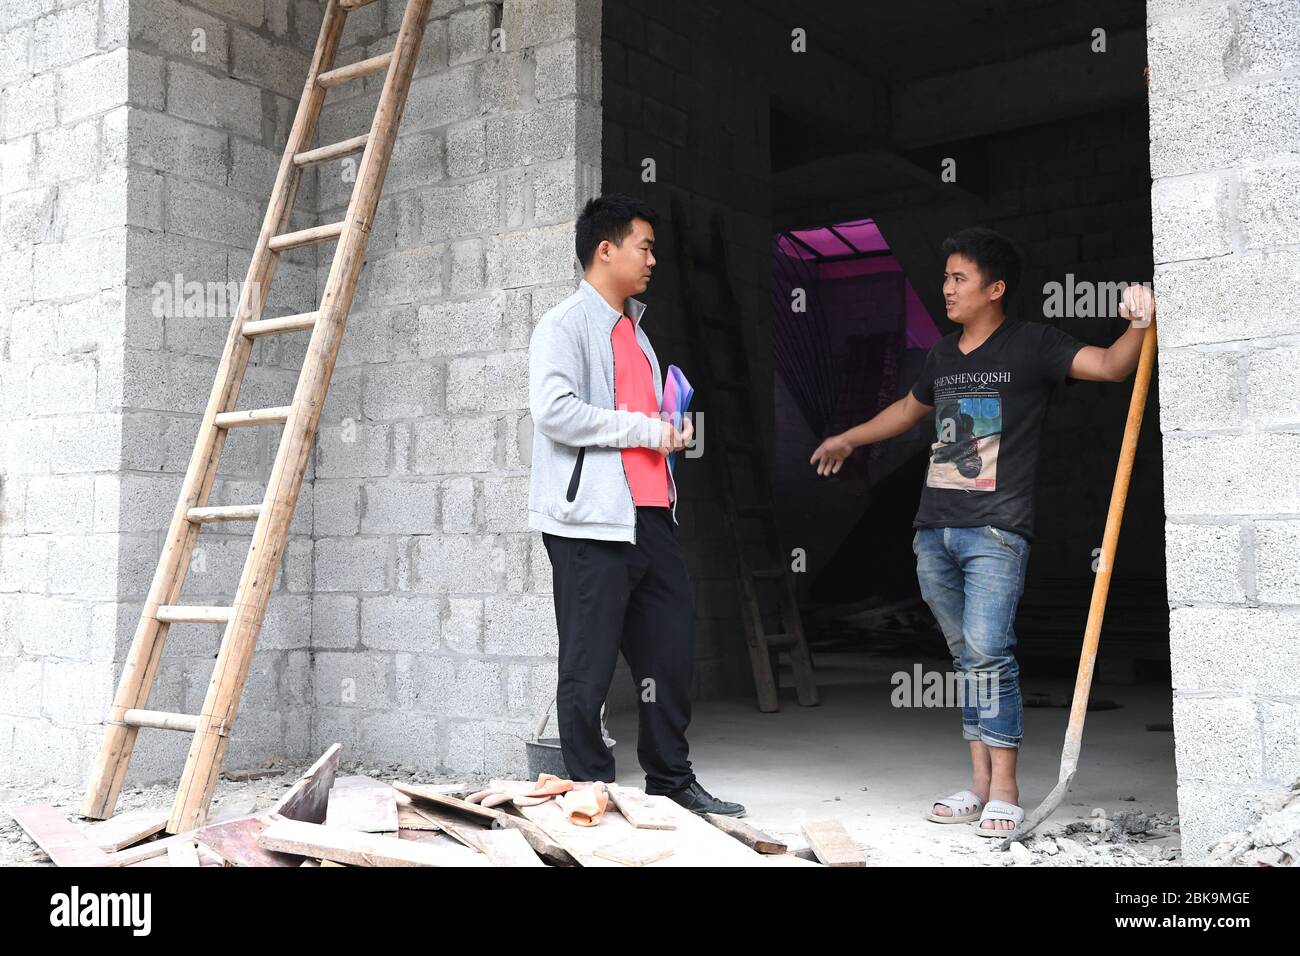 (200503) -- NANNING, May 3, 2020 (Xinhua) -- Yu Yang (L), a 32-year-old village official of Houlong Village, talks with a villager in Sicheng Township of Lingyun County, south China's Guangxi Zhuang Autonomous Region, April 17, 2020. In Guangxi, many young people are entrusted with the task of strengthening the Communist Party of China (CPC) at the grassroots level and aiding in poverty alleviation. They are working on the poverty relief front: going door to door to find about people's livelihood and coming up with ideas to help them shake off poverty. The youth of today shine in the cour Stock Photo